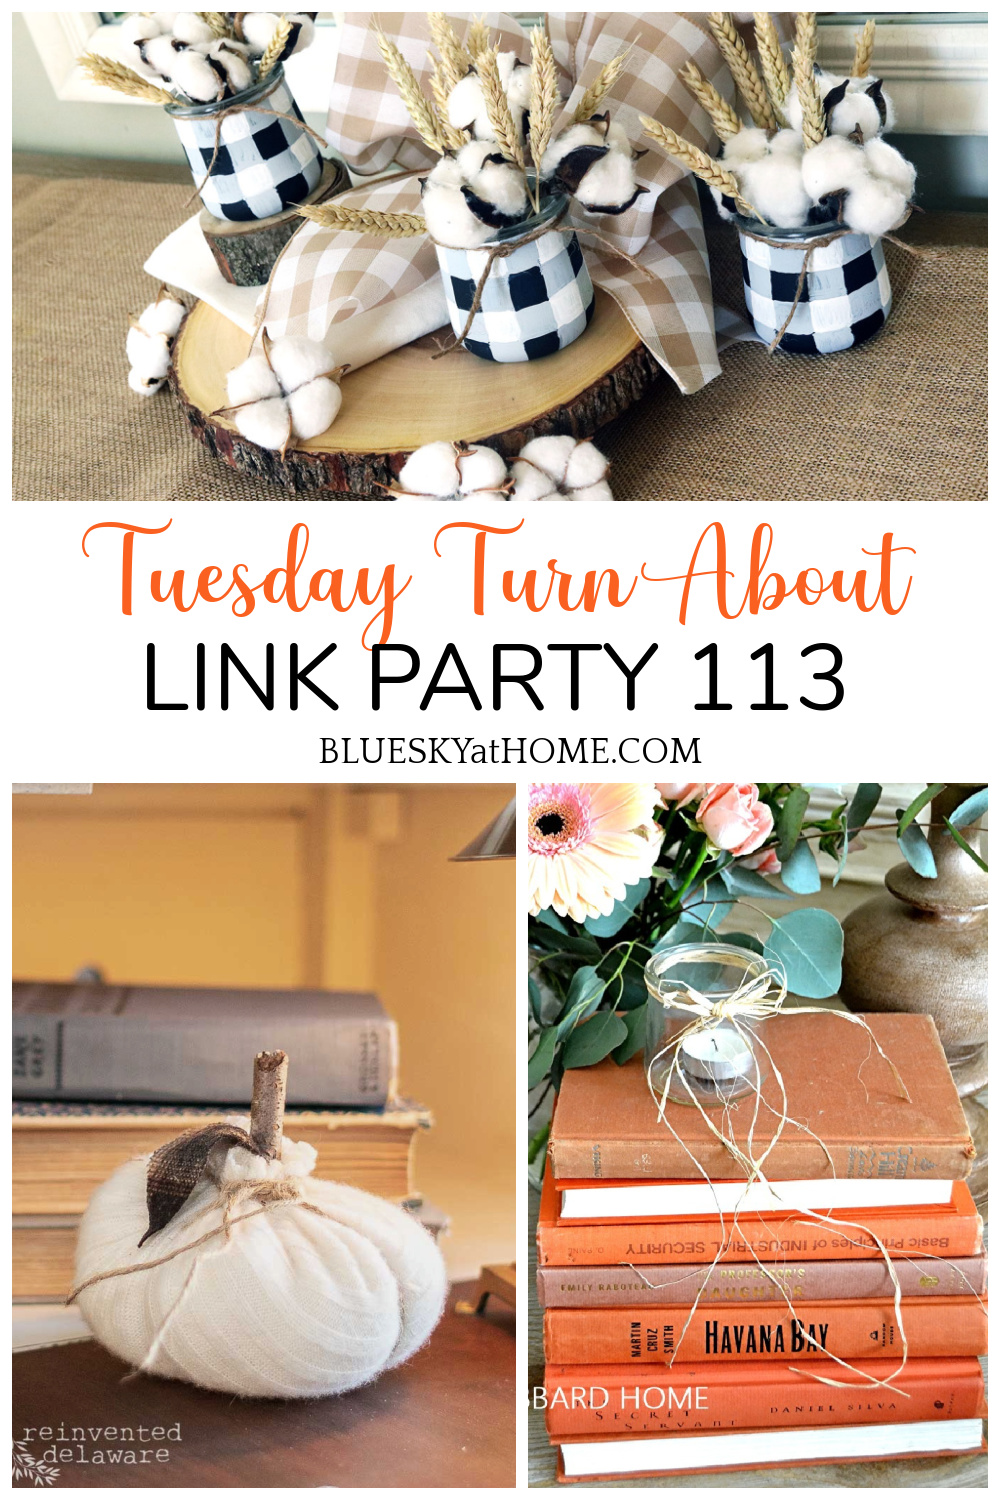 Tuesday Turn About Link Party 113